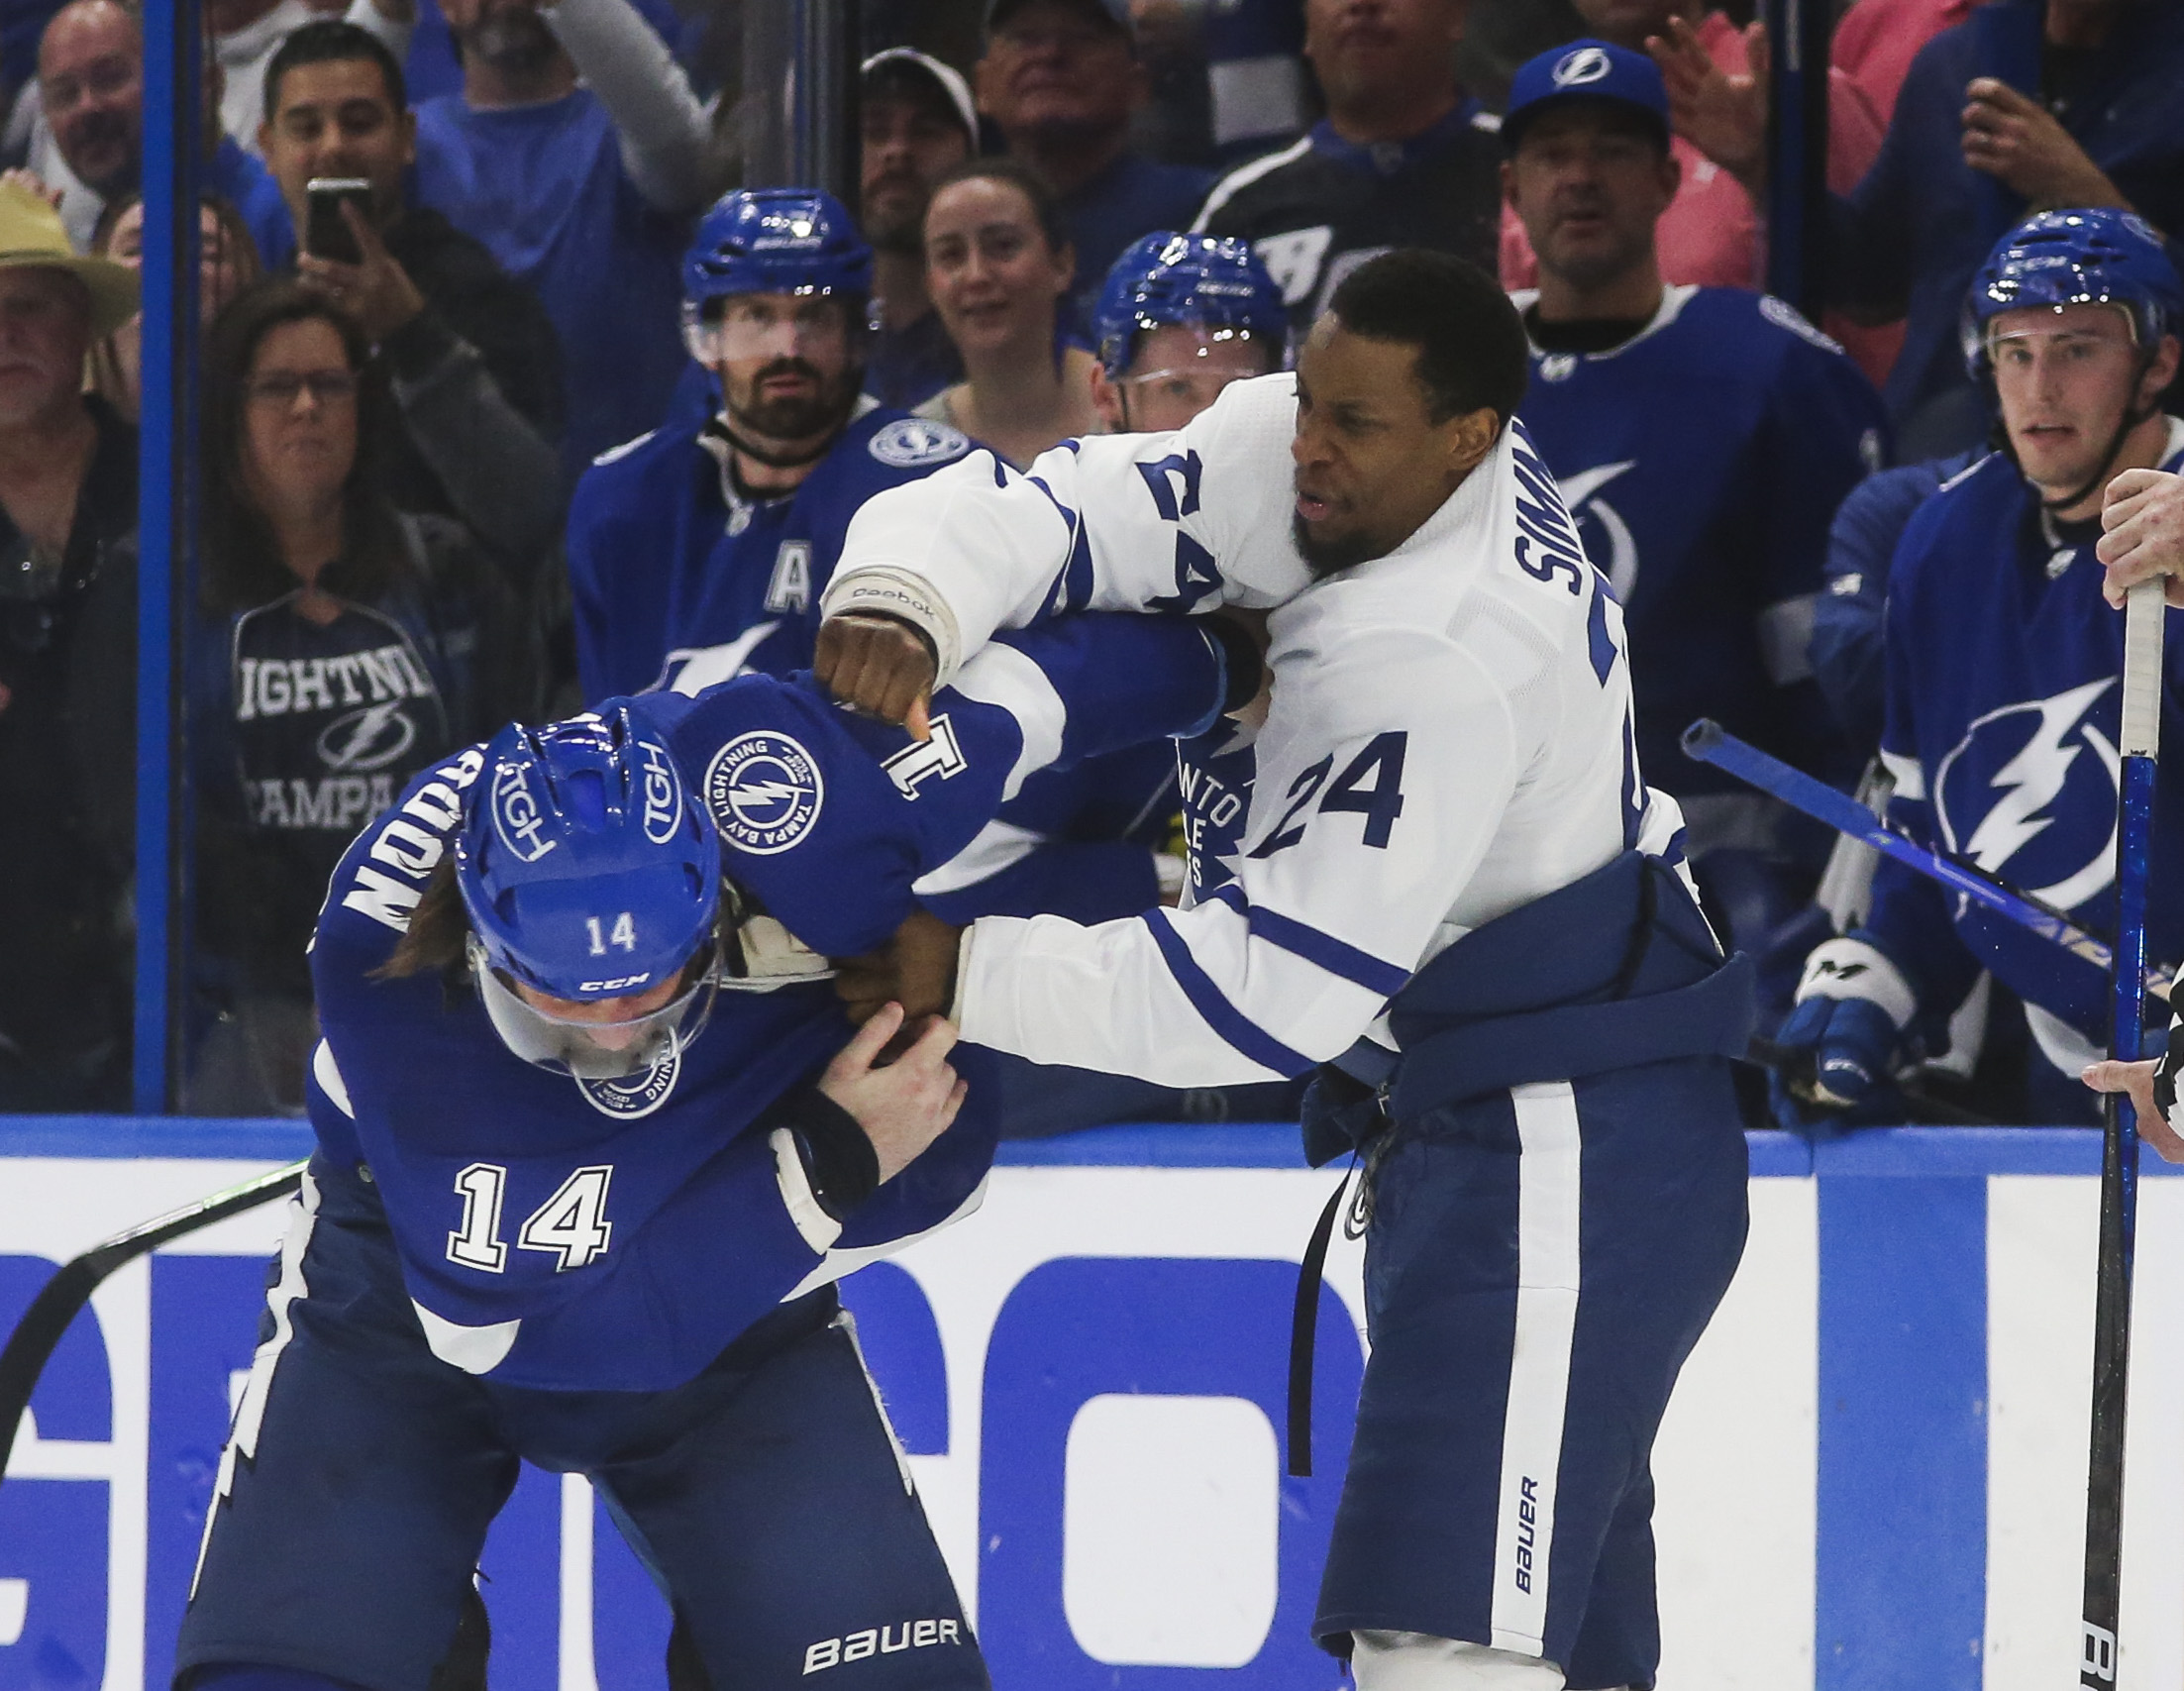 SIMMONS: Game 1 for Maple Leafs was a stunning disaster